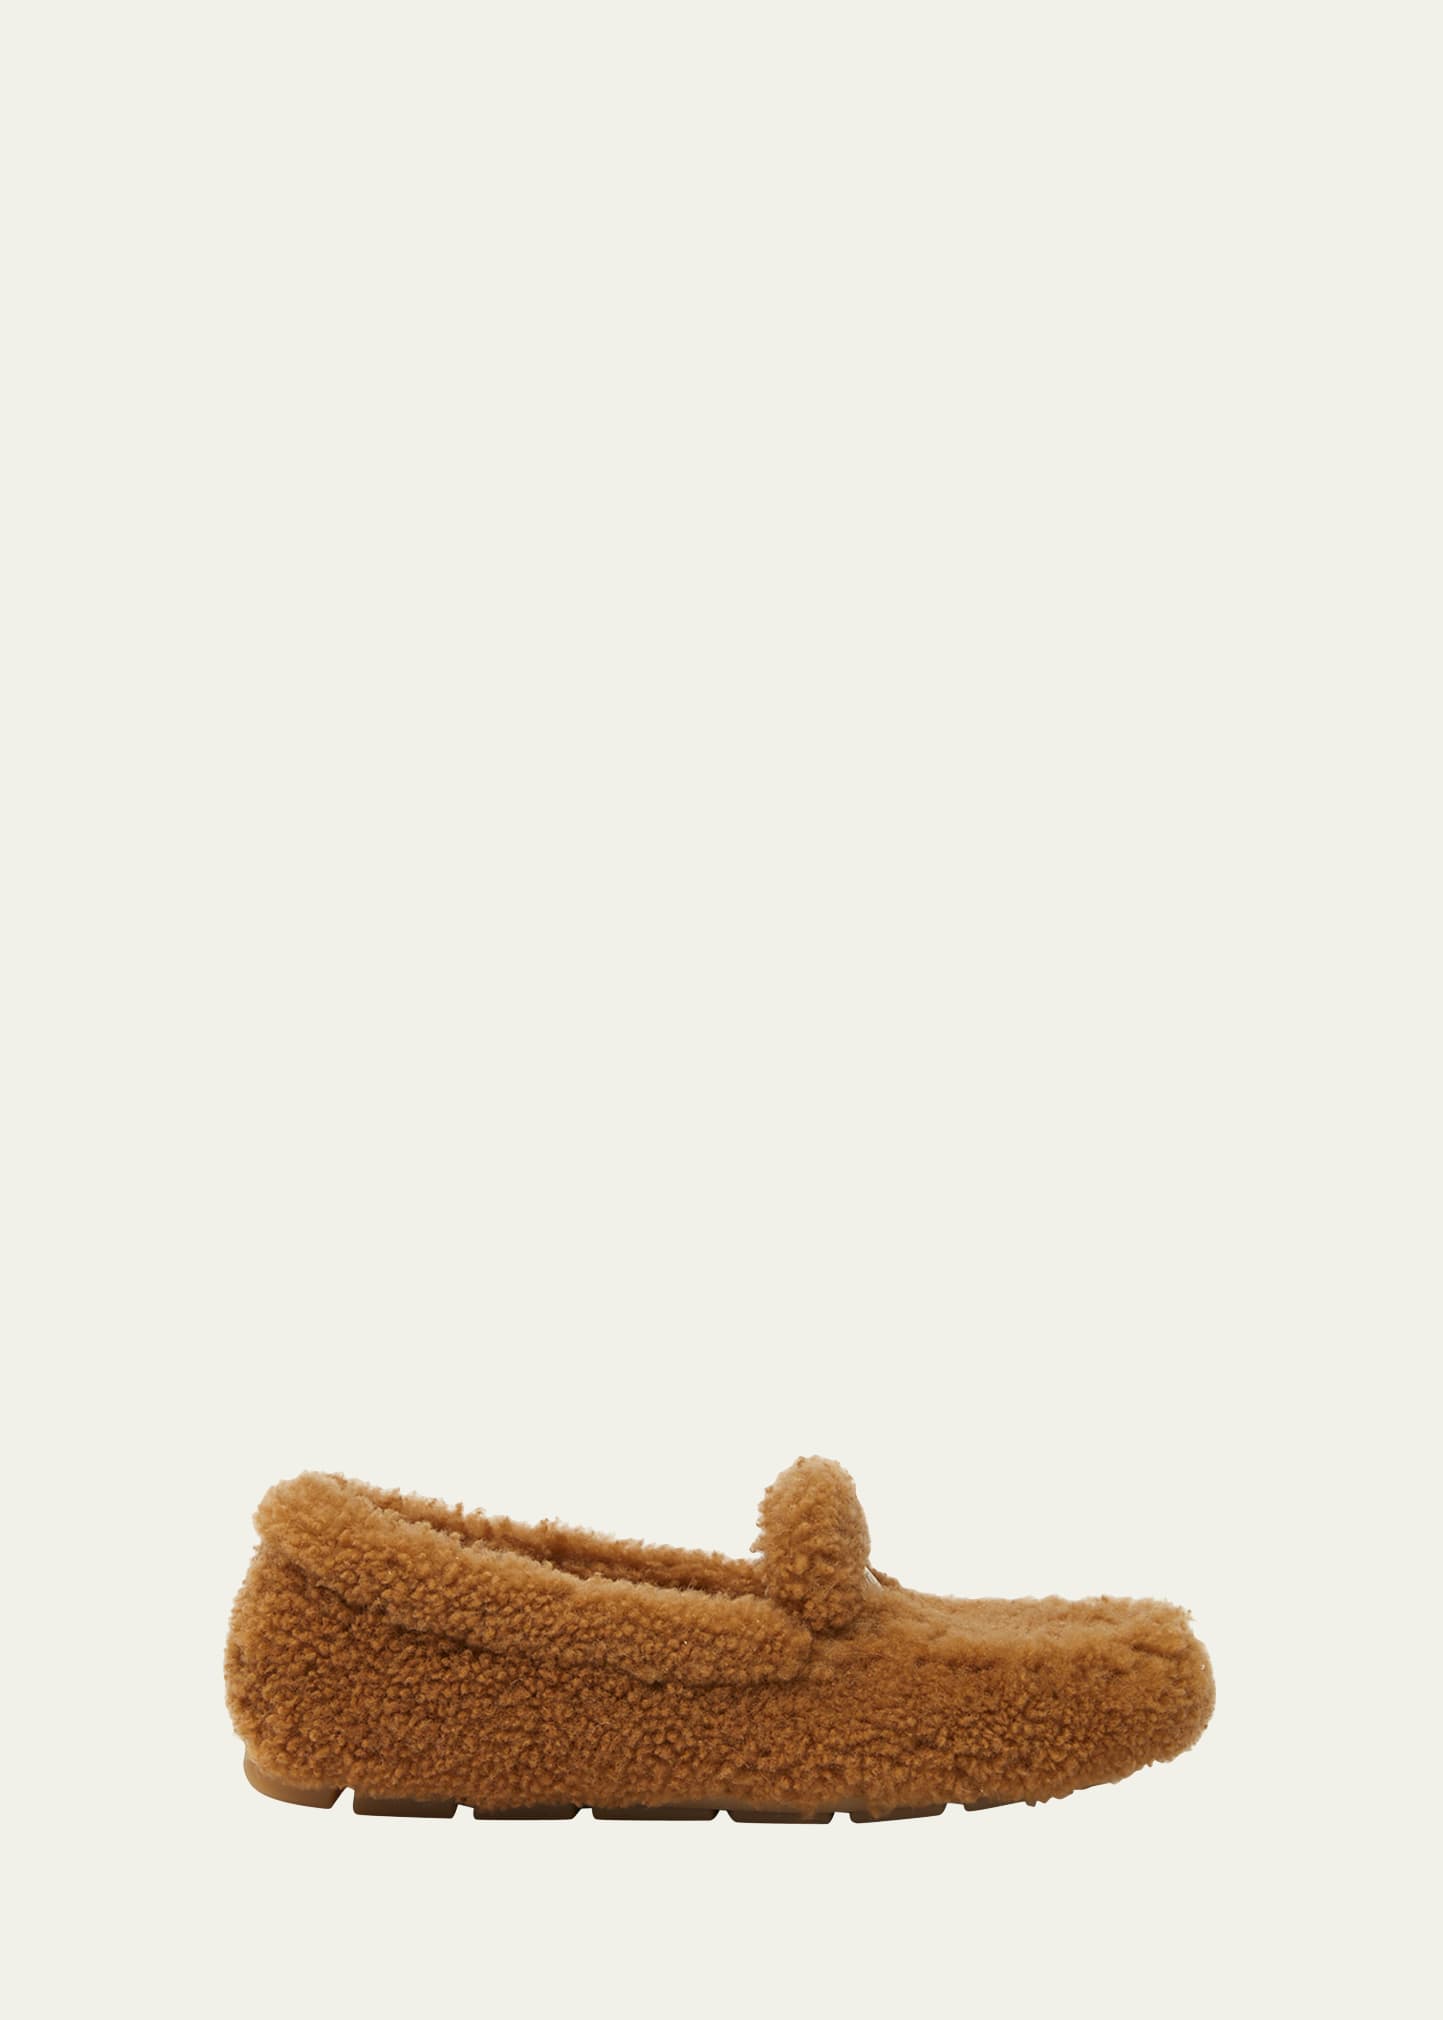 Prada Shearling Cozy Driver Loafers In Brown